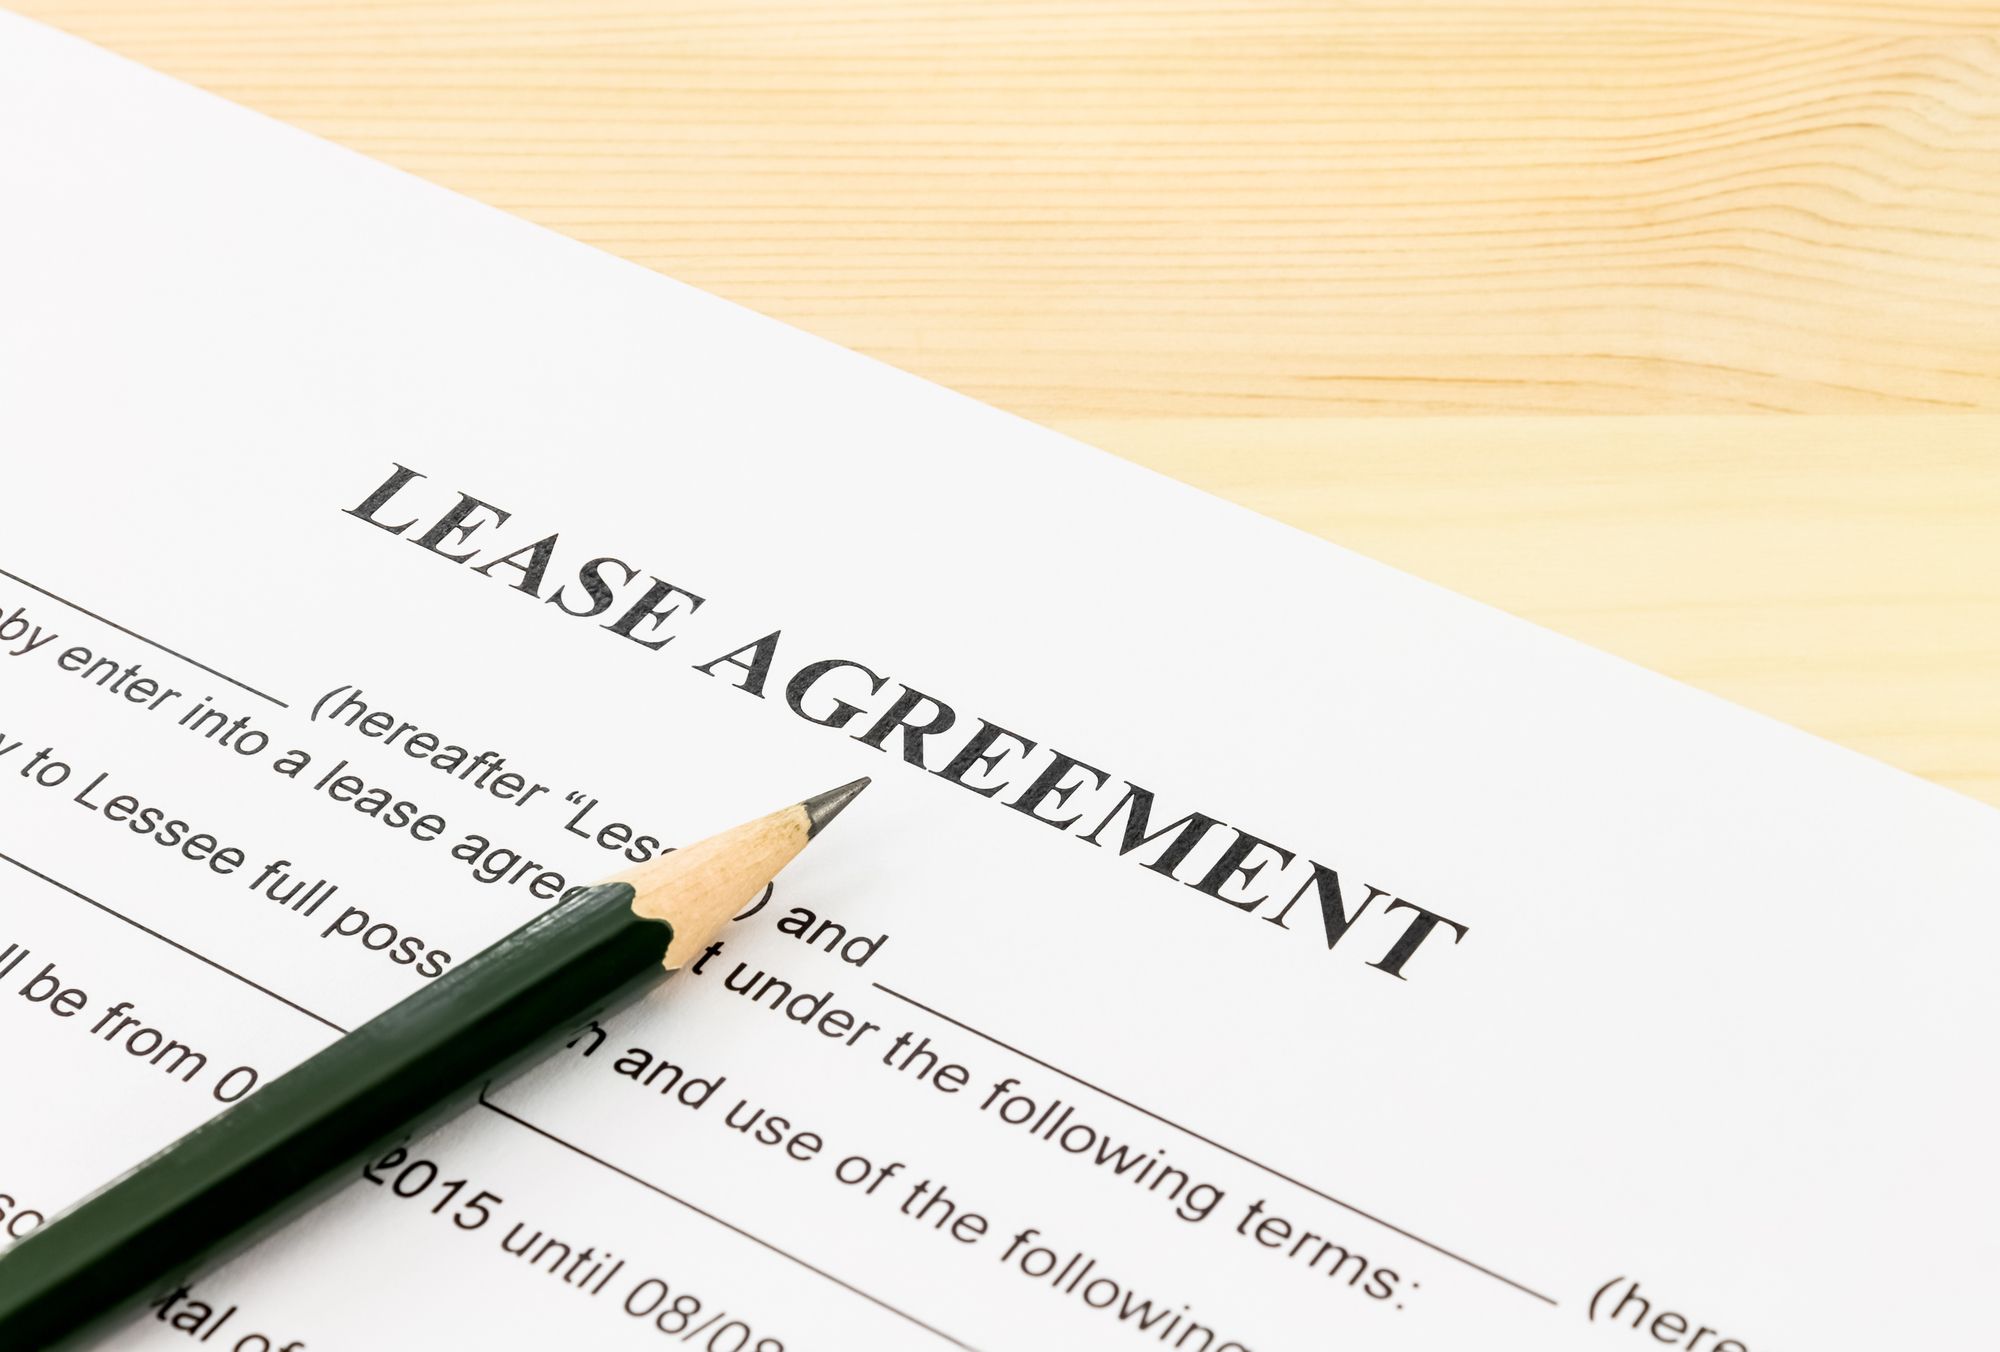 Lease Agreement Contract Document and Pencil Bottom Left Corner - Oasis at Waipahu